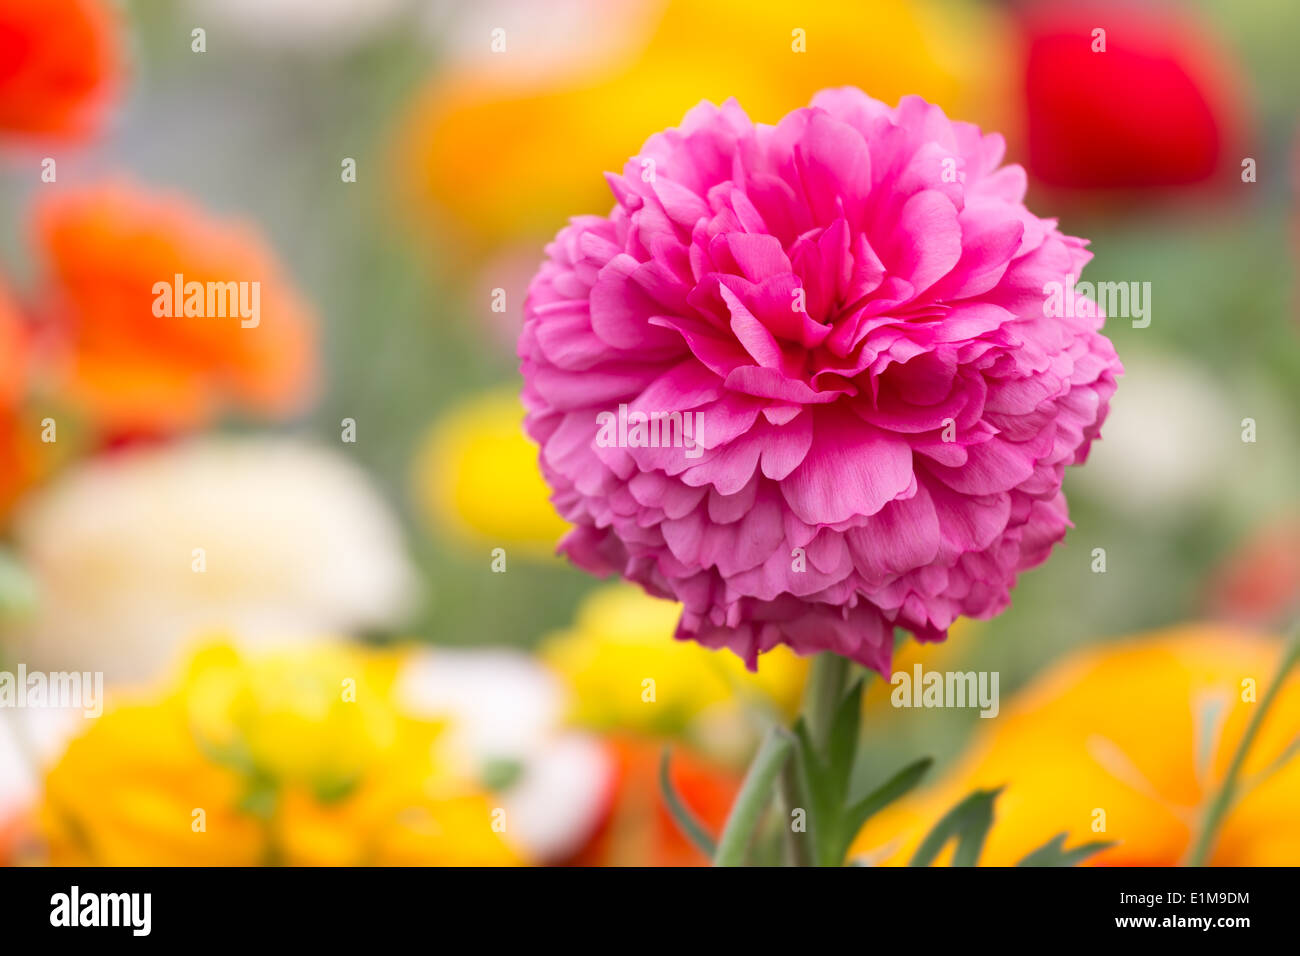 Purple ranonkel flower at a colorful background Stock Photo